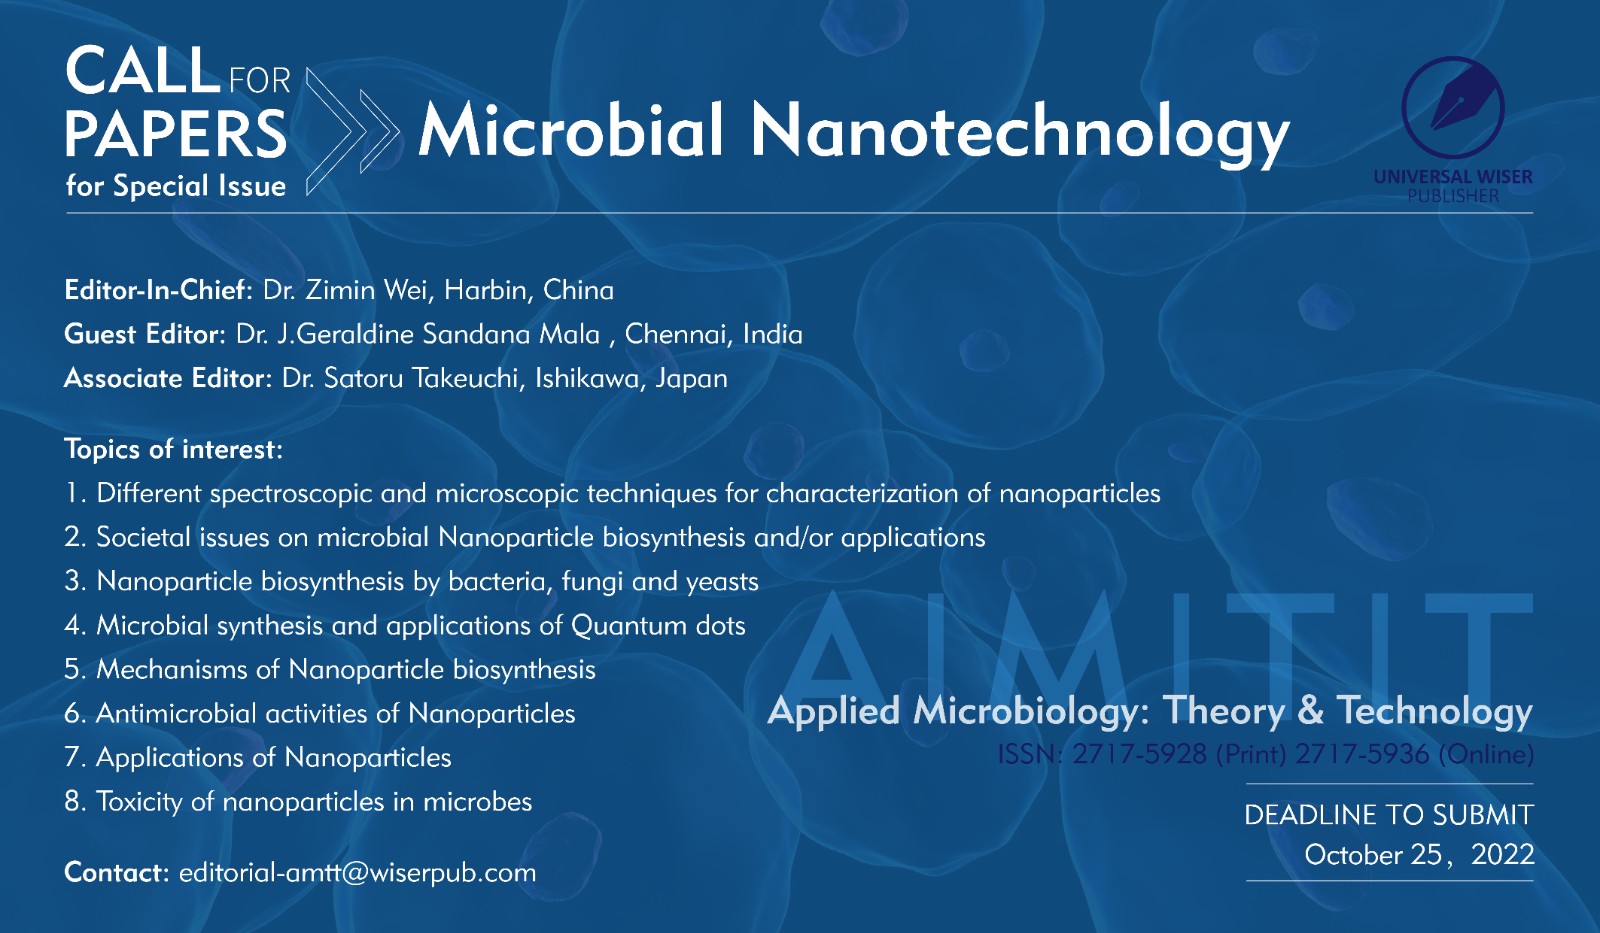 Applied Microbiology: Theory & Technology — Special Issue on Microbial Nanotechnology Calling for papers